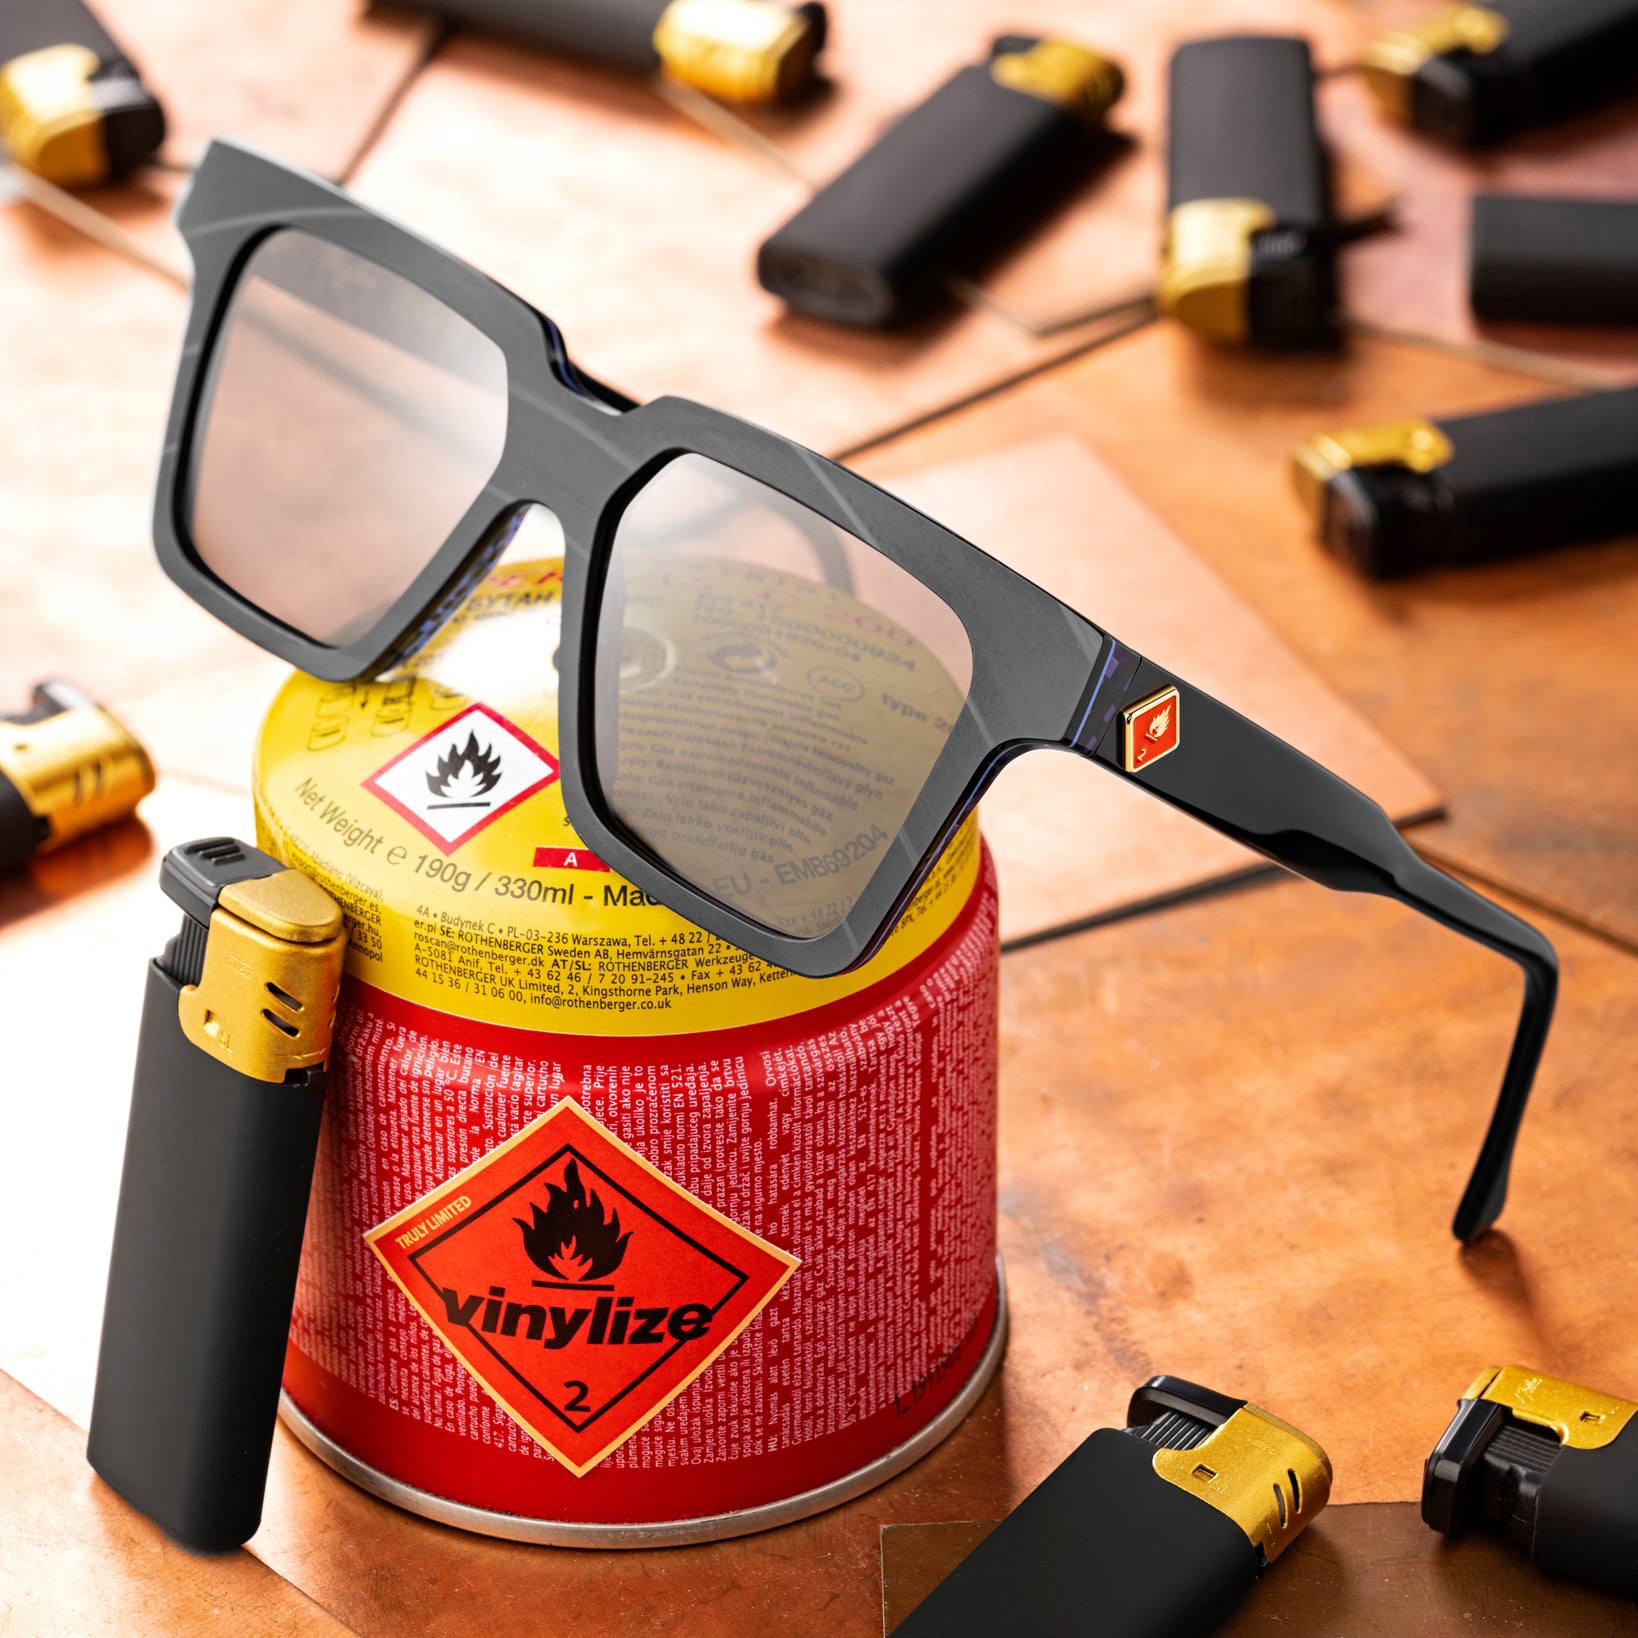 Vinylize sunglass sitting on a colorful metal can